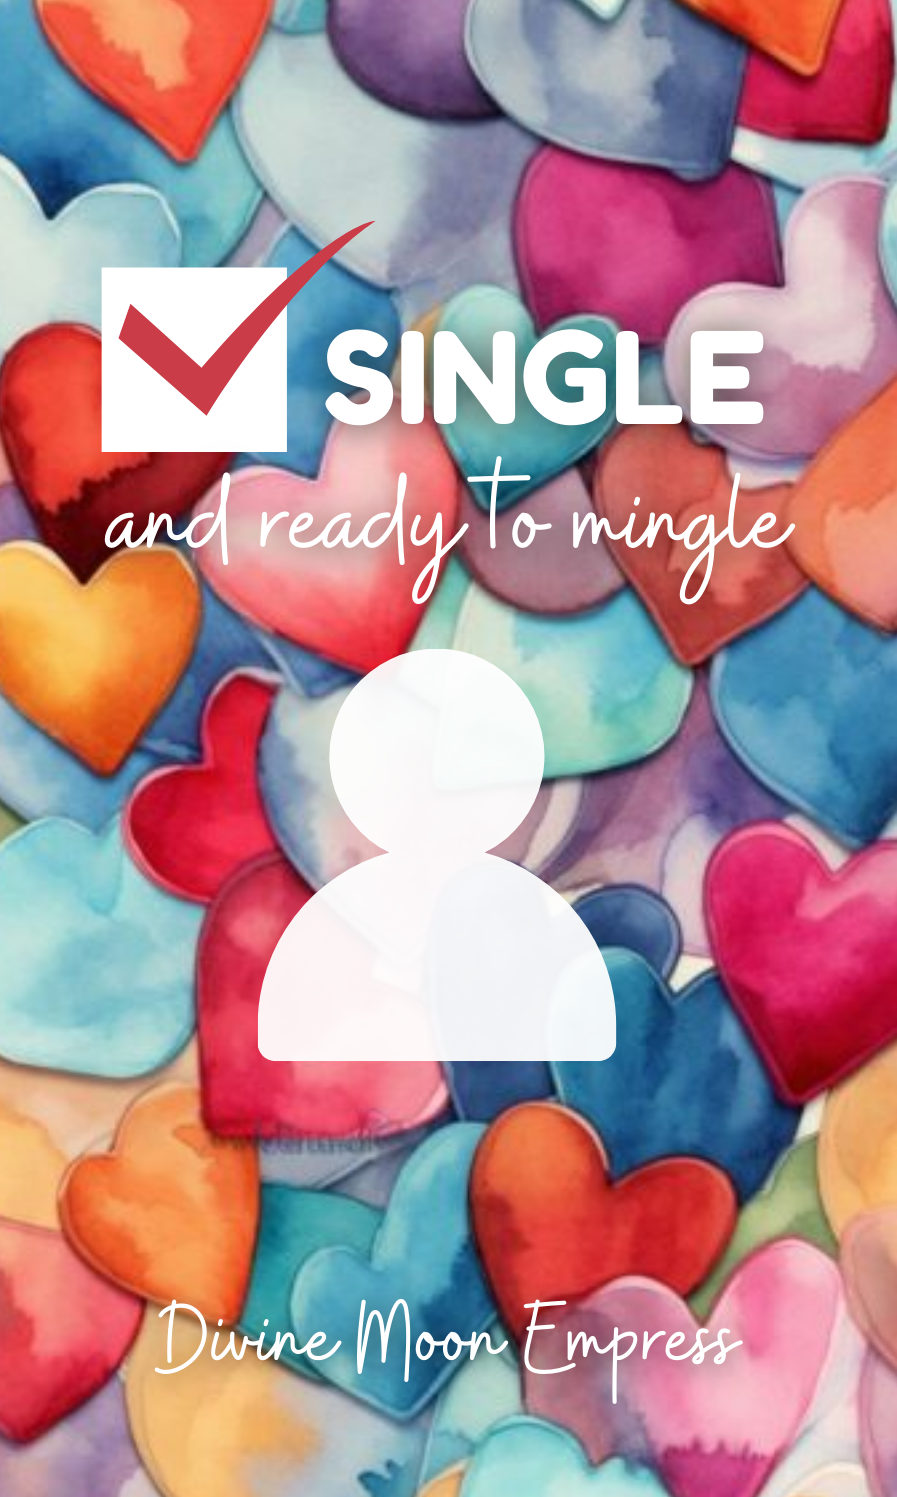 Single and ready to mingle Oracle (76 cards) **PRE-ORDER** First orders will be placed on May 31st.